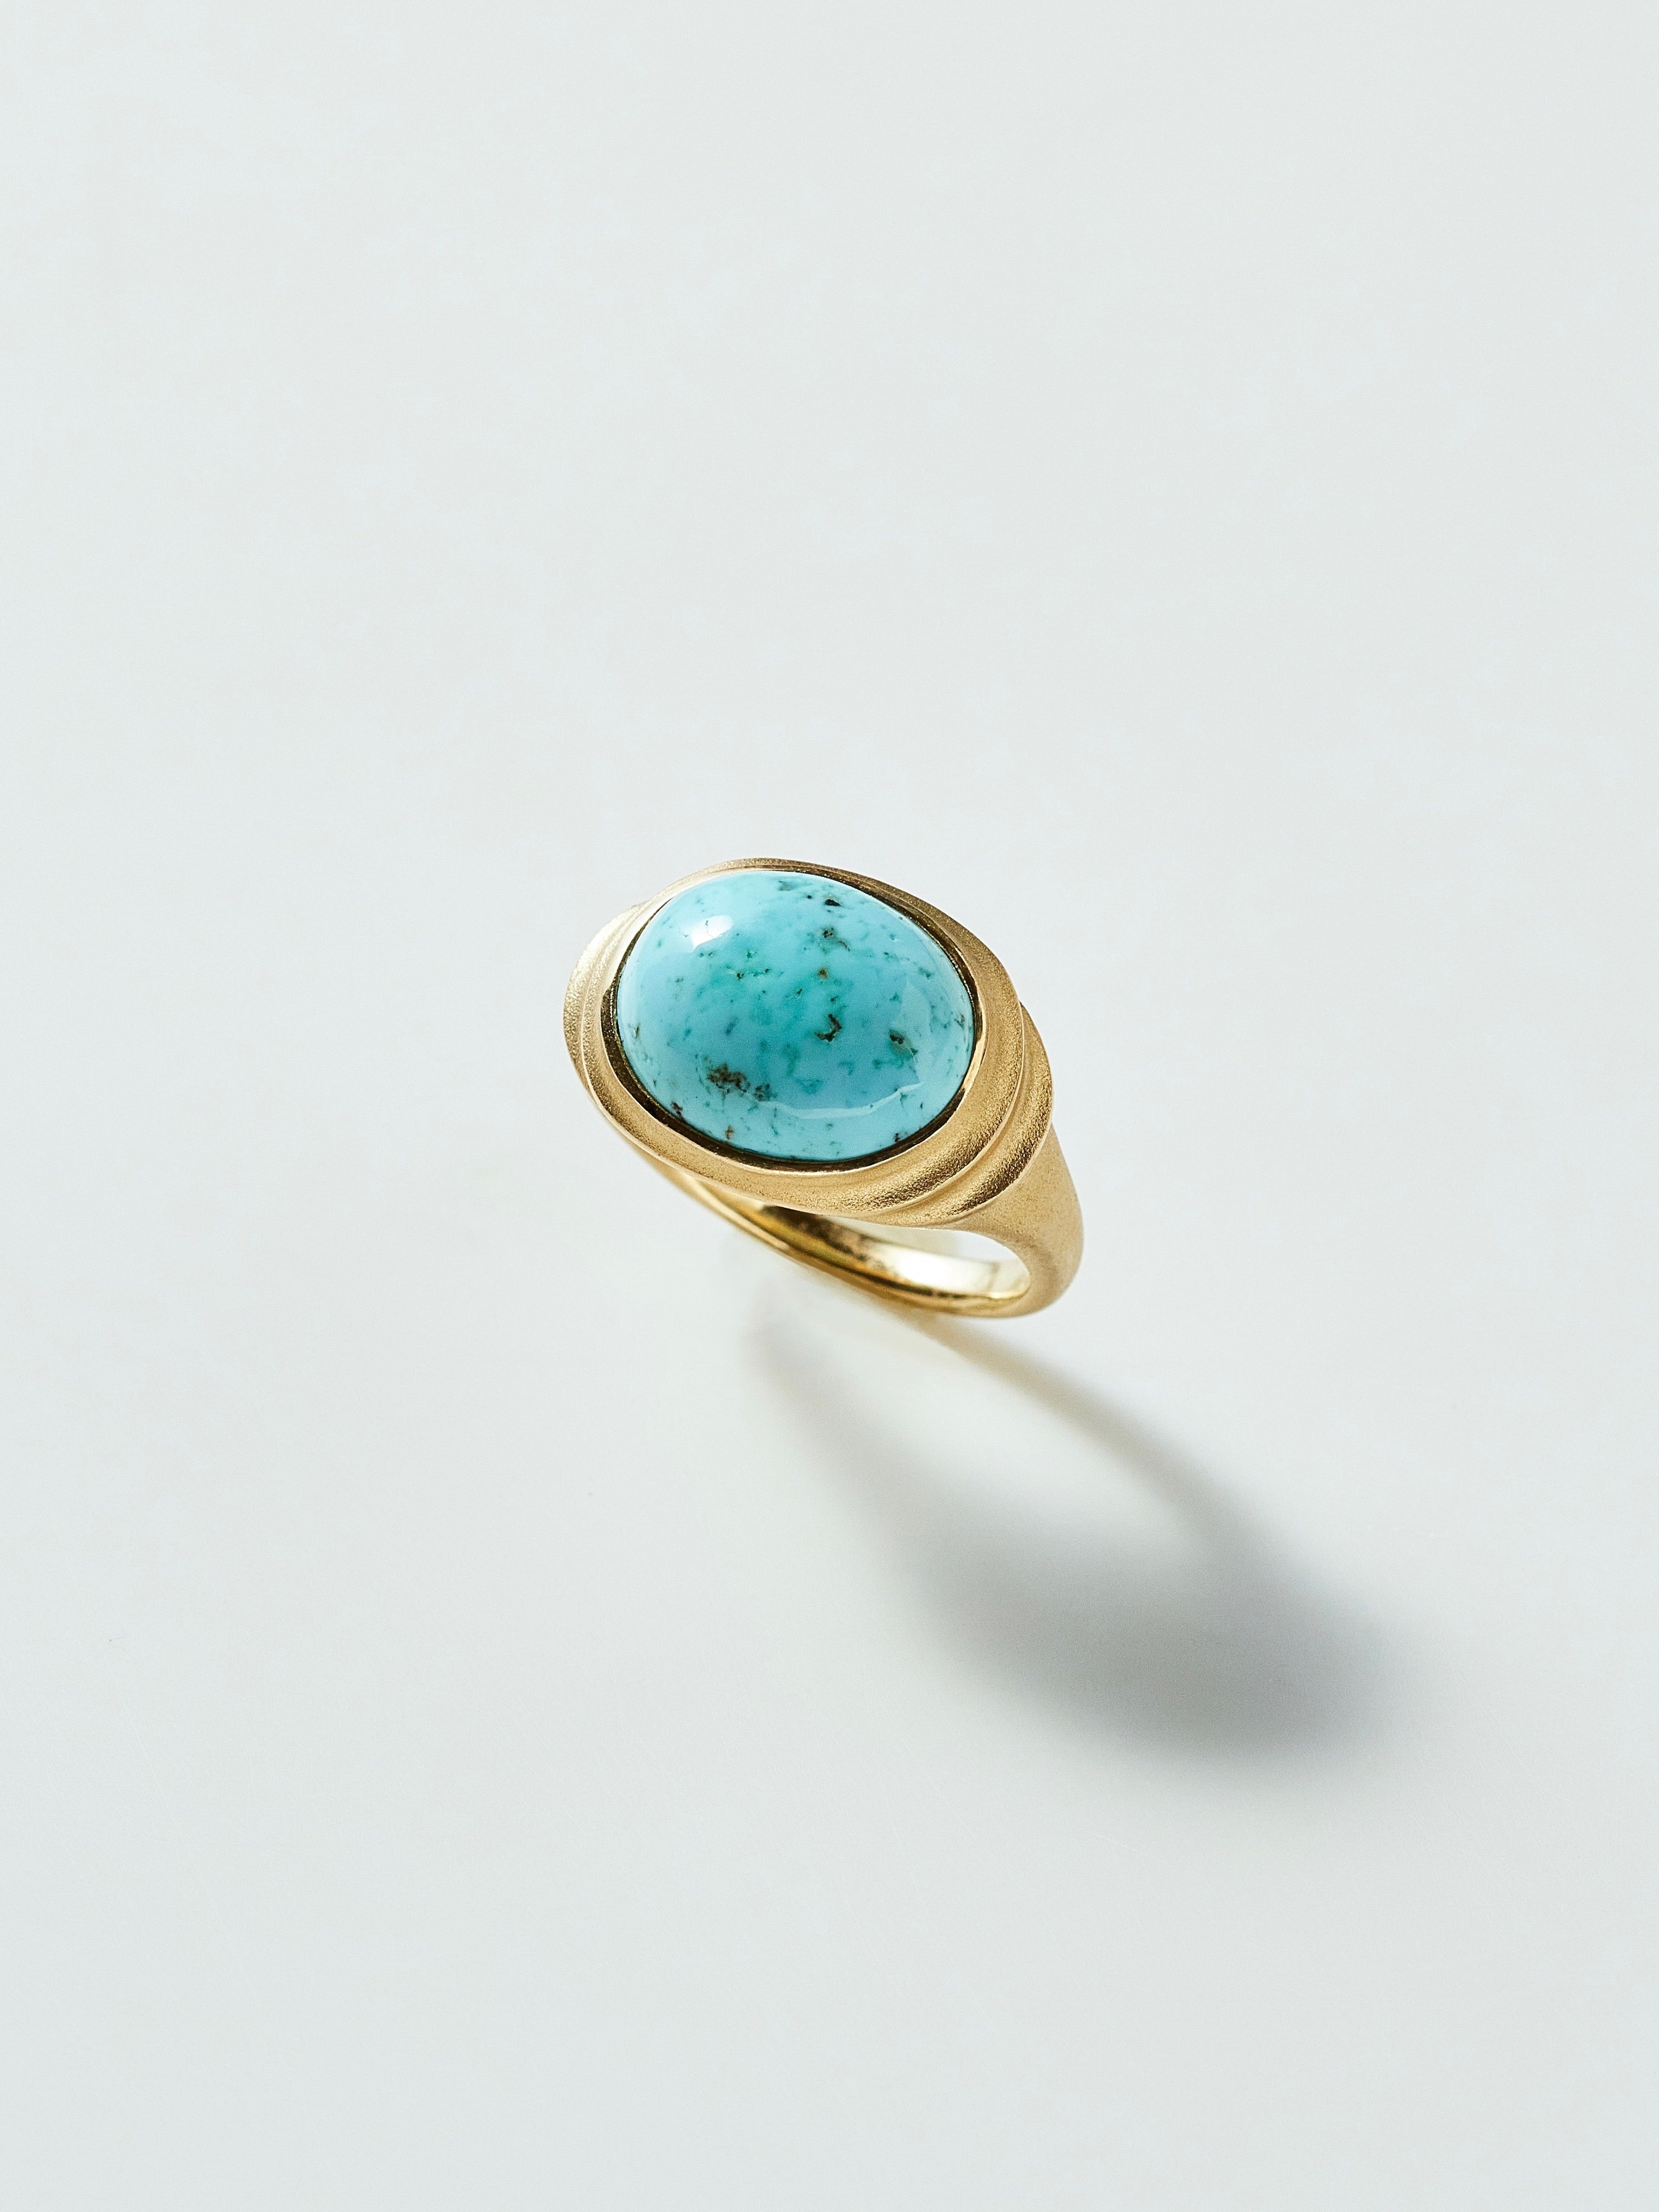 Turquoise Màre Ring in 18k Yellow Gold, Size 5.5